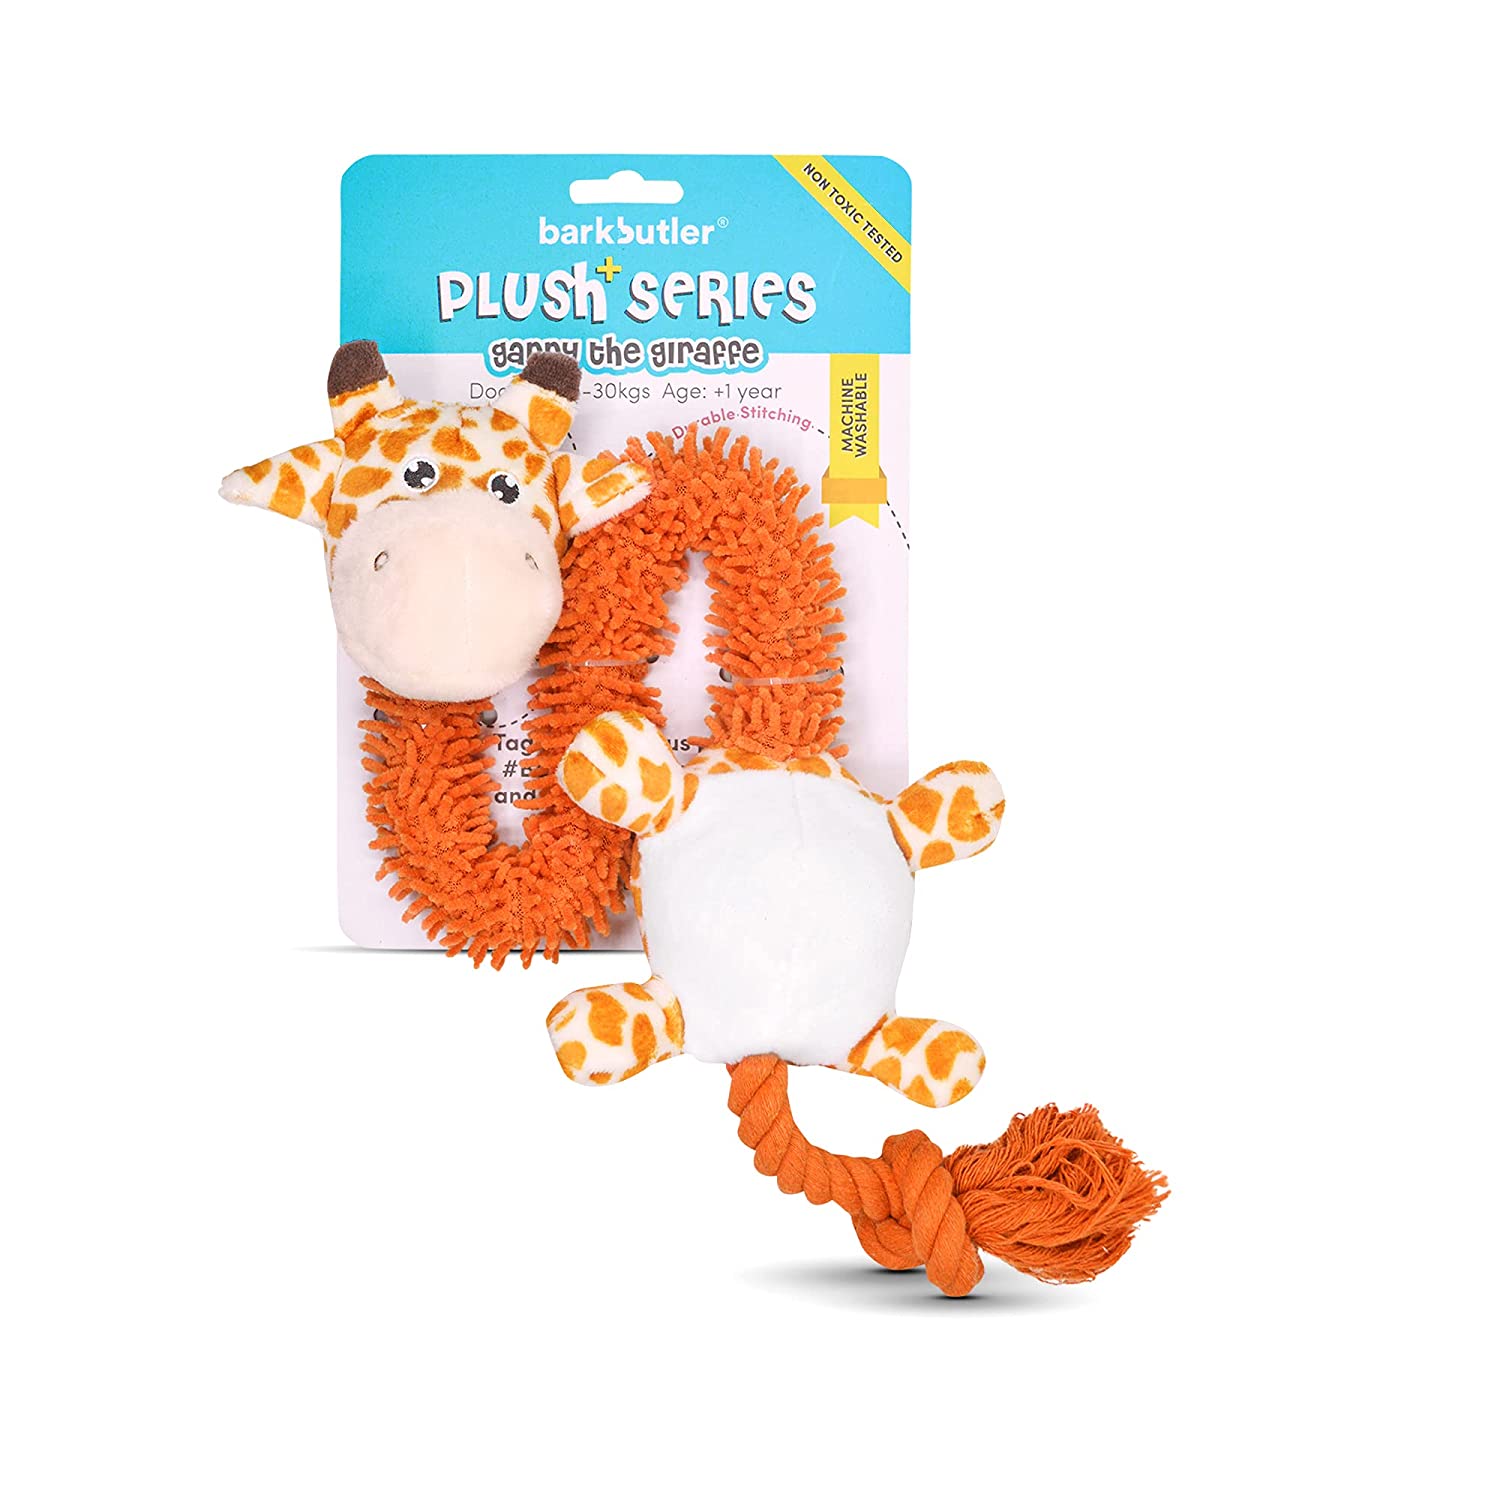 FOFOS Vegi-Bites Carrot Dog Toy - Tails In The House